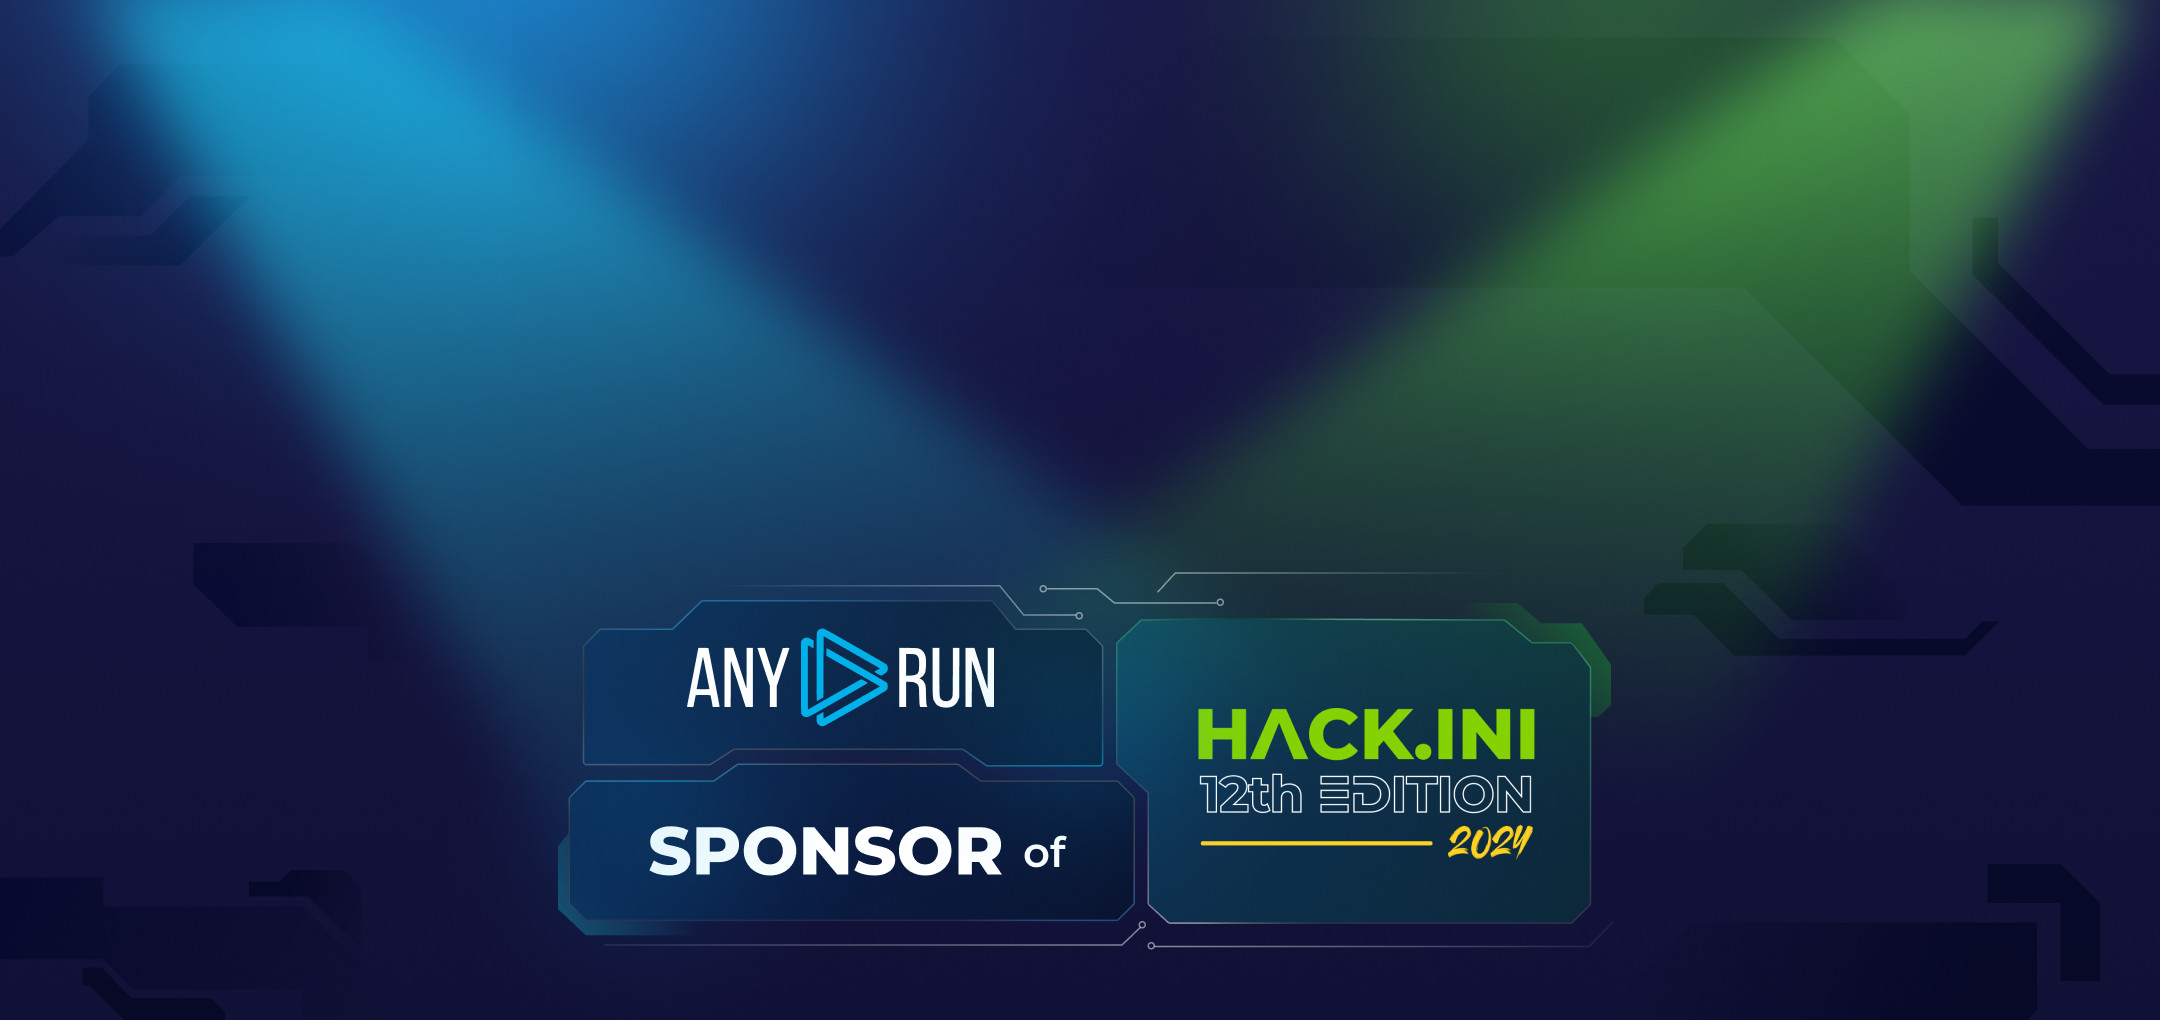 ANY.RUN Sponsors the 12th Edition of Hack.INI